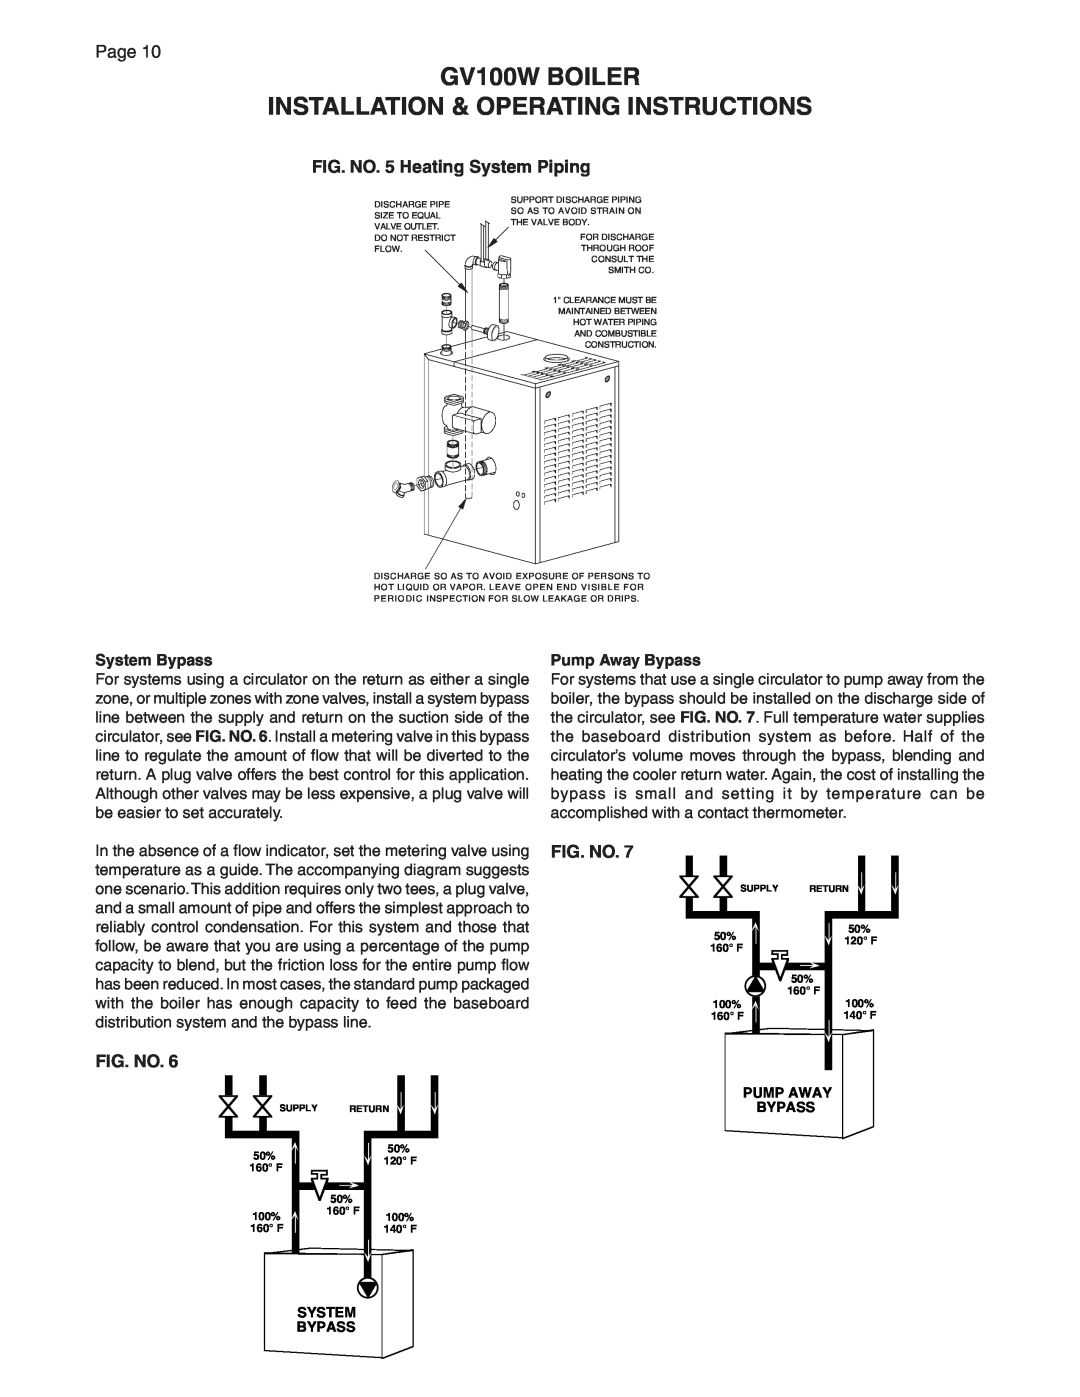 Smith Cast Iron Boilers GVIOM-5R GV100W BOILER, Installation & Operating Instructions, FIG. NO. 5 Heating System Piping 